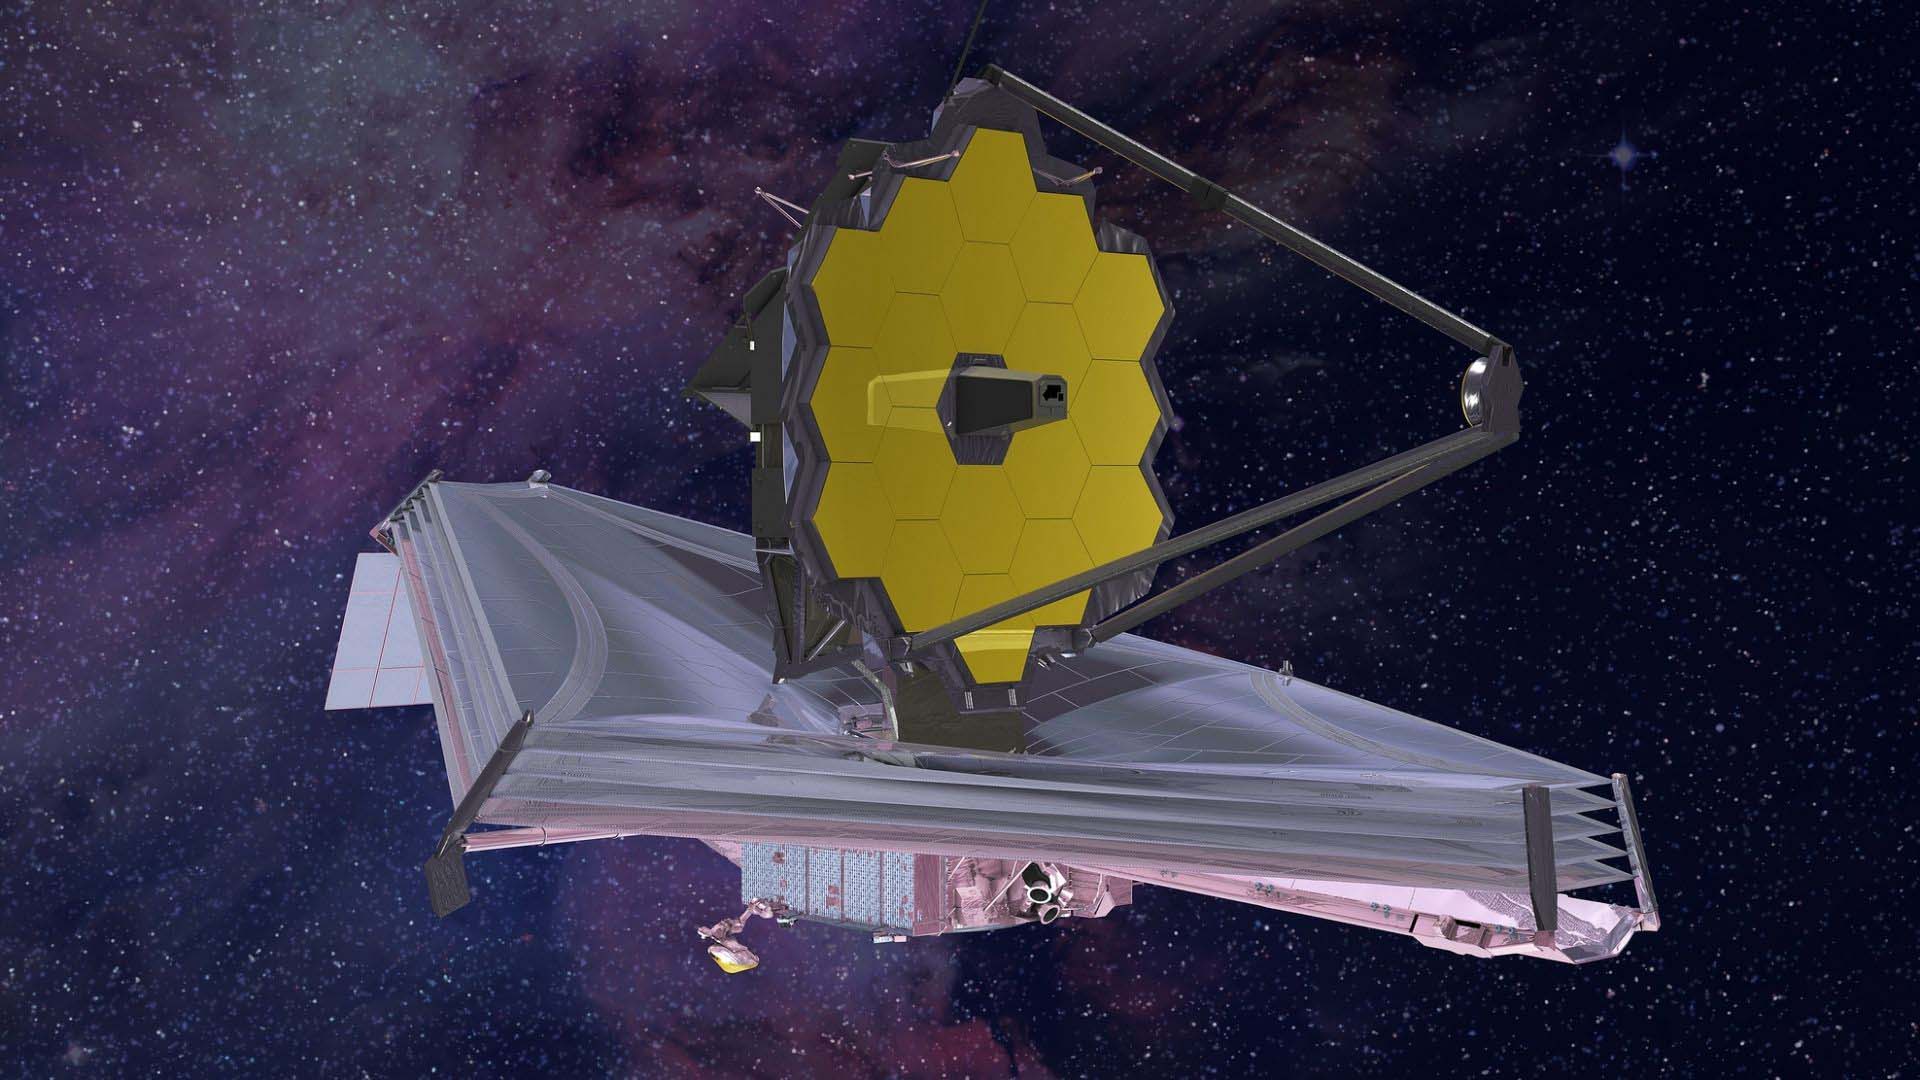 Artist's conception of the Webb space telescope when it is fully deployed at L2